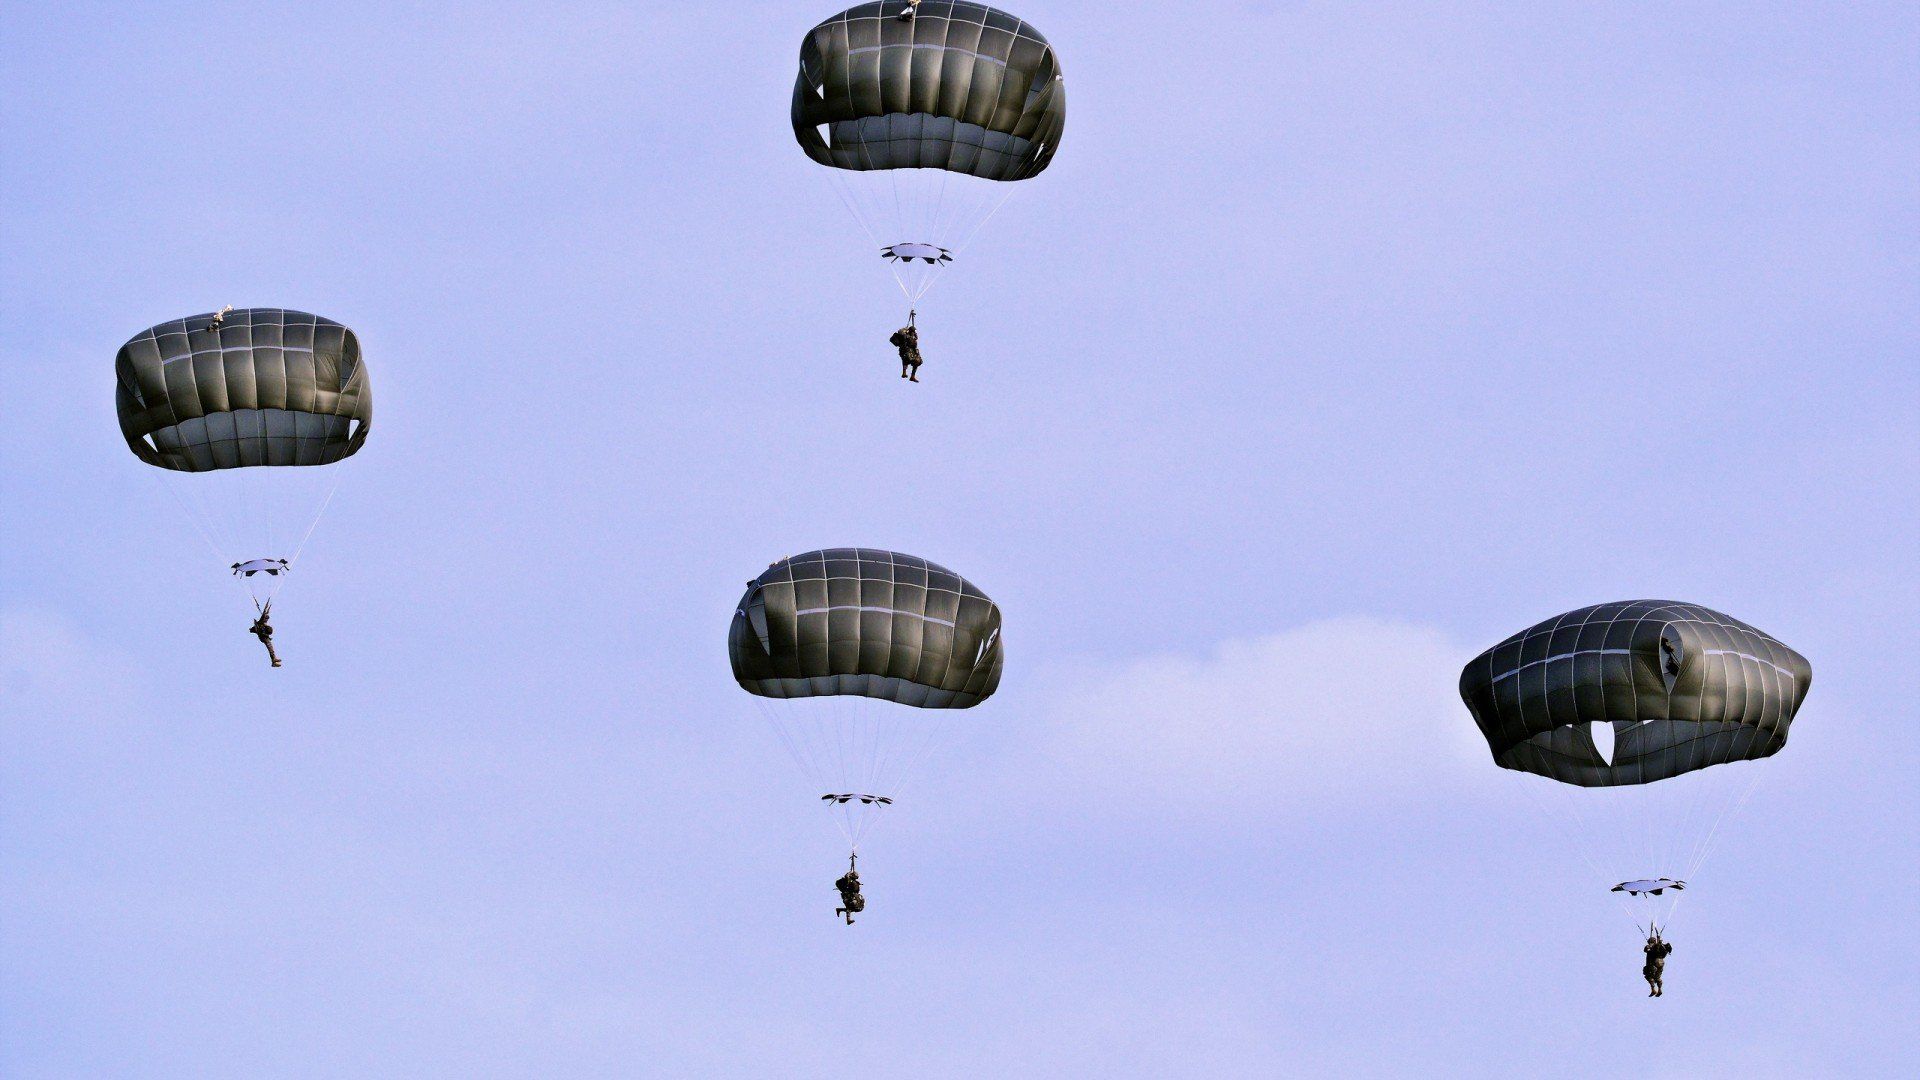 Military army paratrooper wallpaper 1920x1080 506253 WallpaperUP